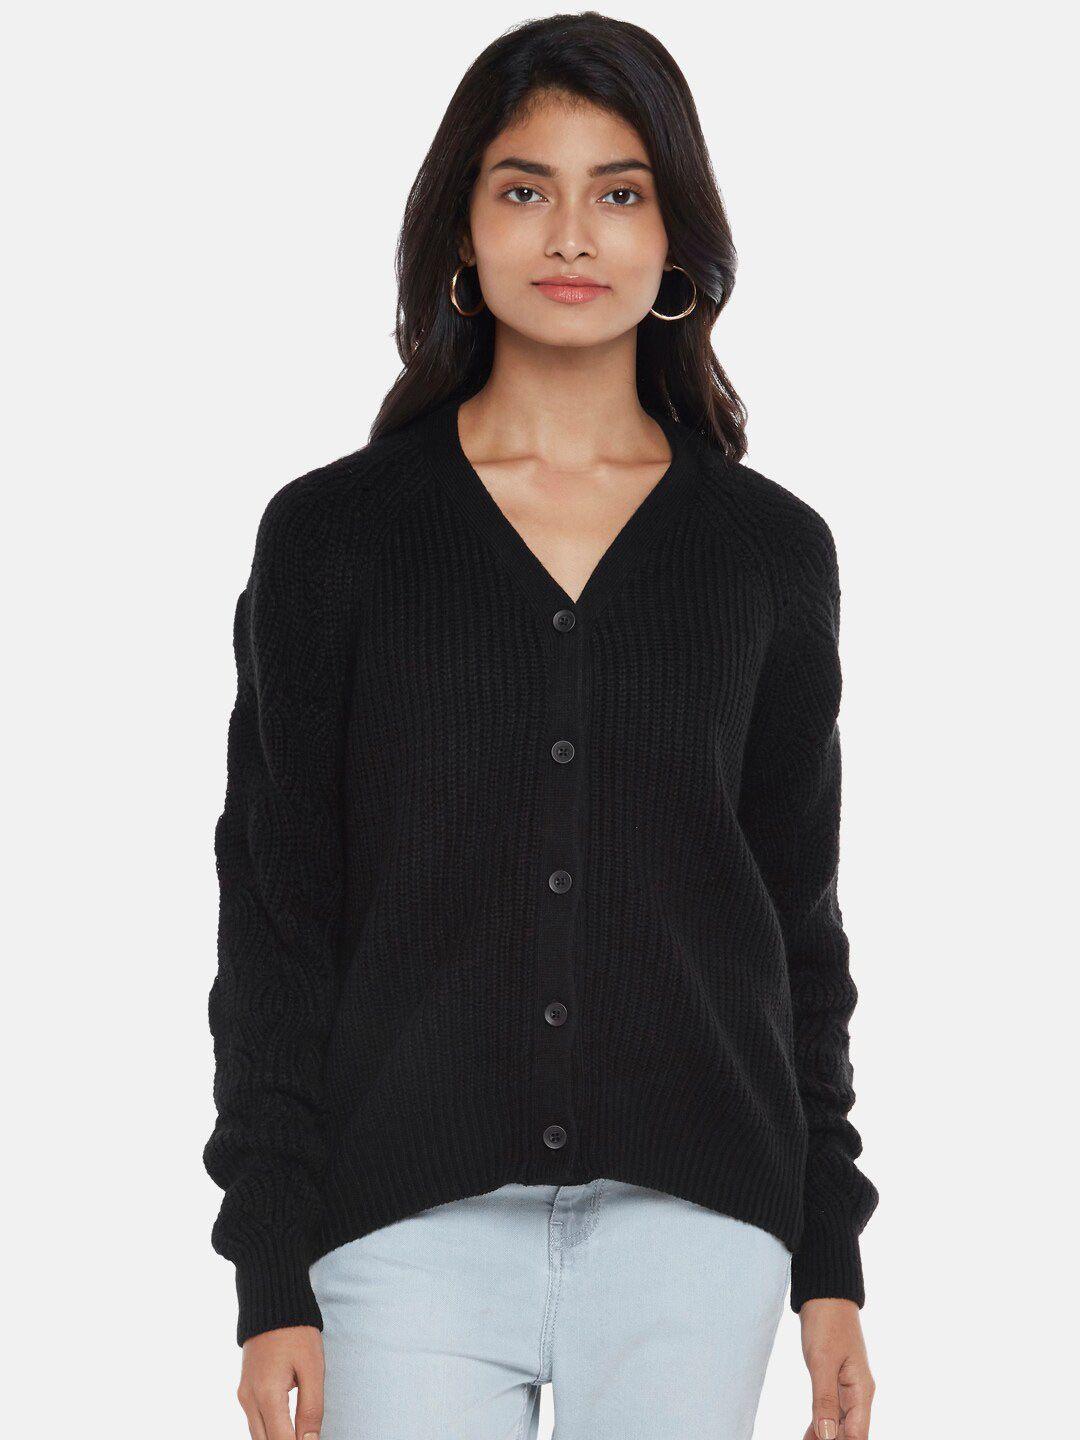 honey by pantaloons women black solid sweater